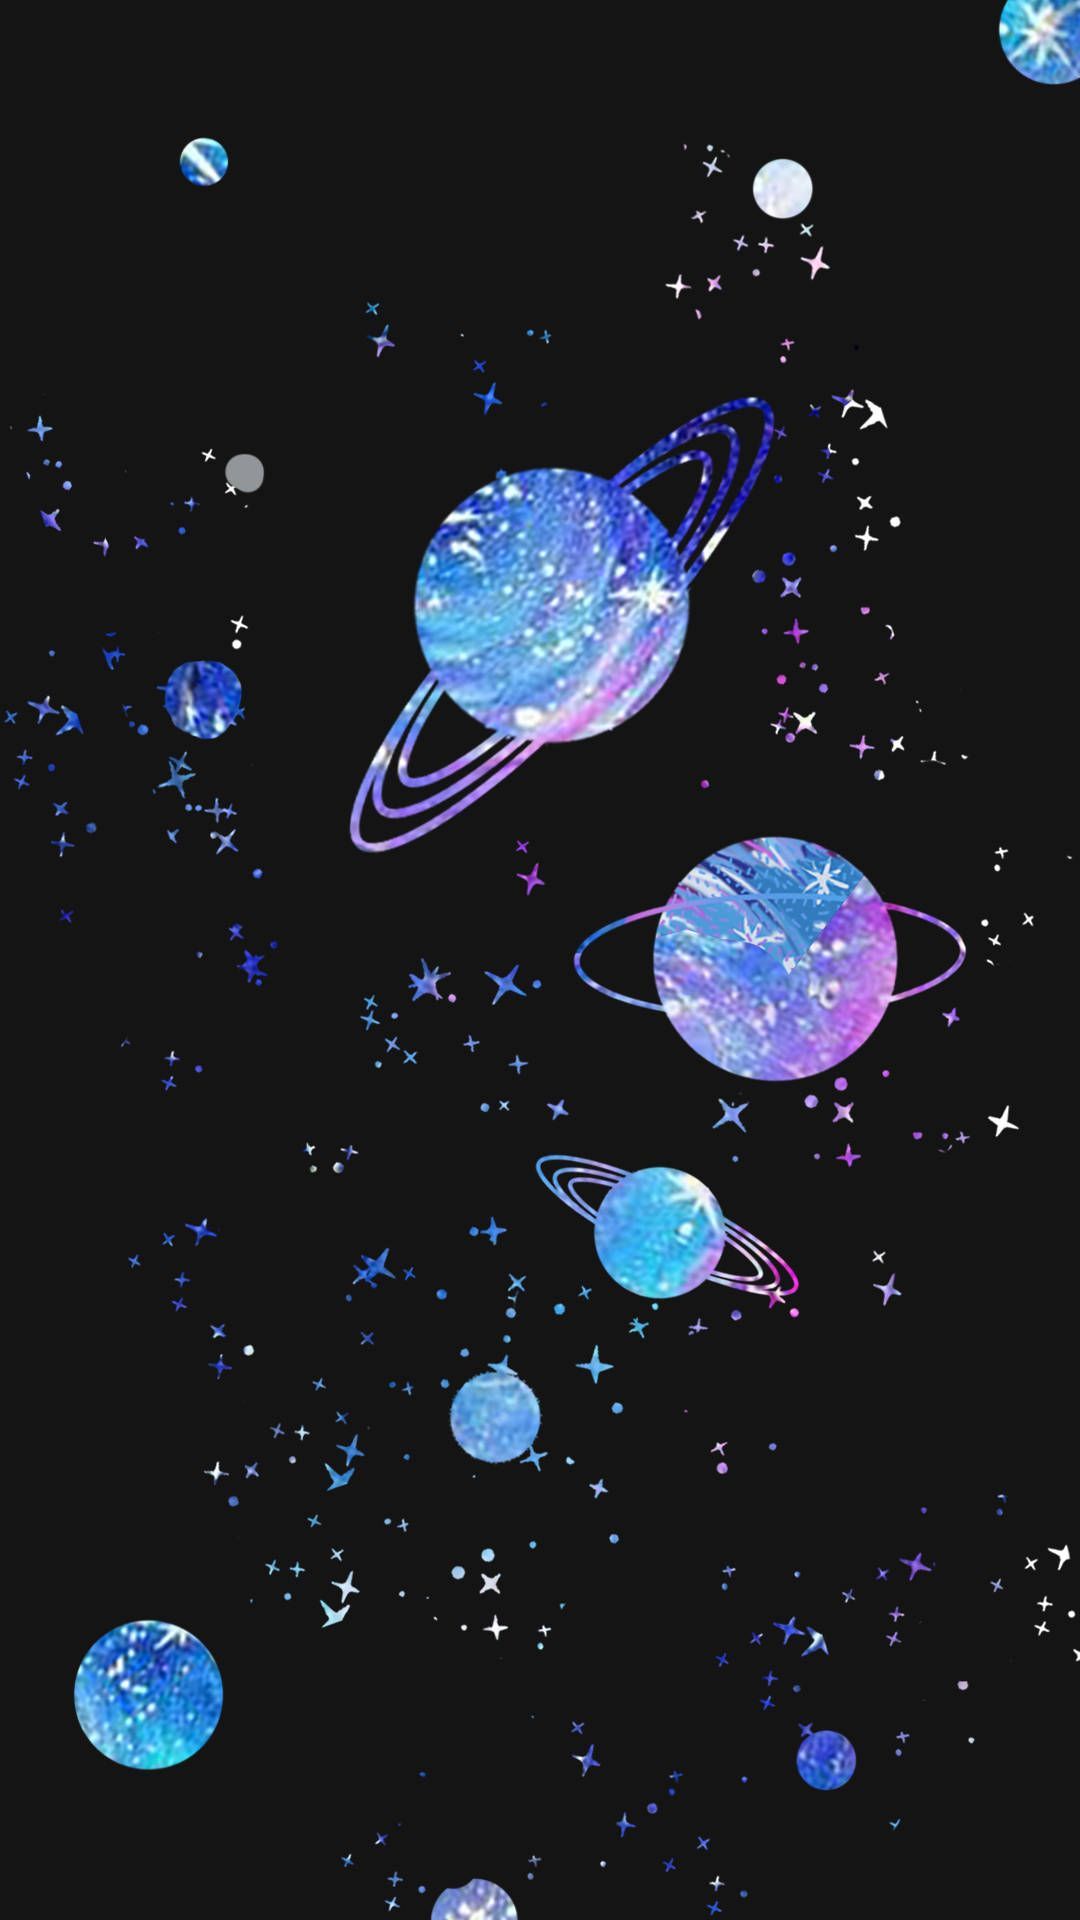 Aesthetic space wallpaper for phone with high-resolution 1080x1920 pixel. You can use this wallpaper for your iPhone 5, 6, 7, 8, X, XS, XR backgrounds, Mobile Screensaver, or iPad Lock Screen - Planet, space